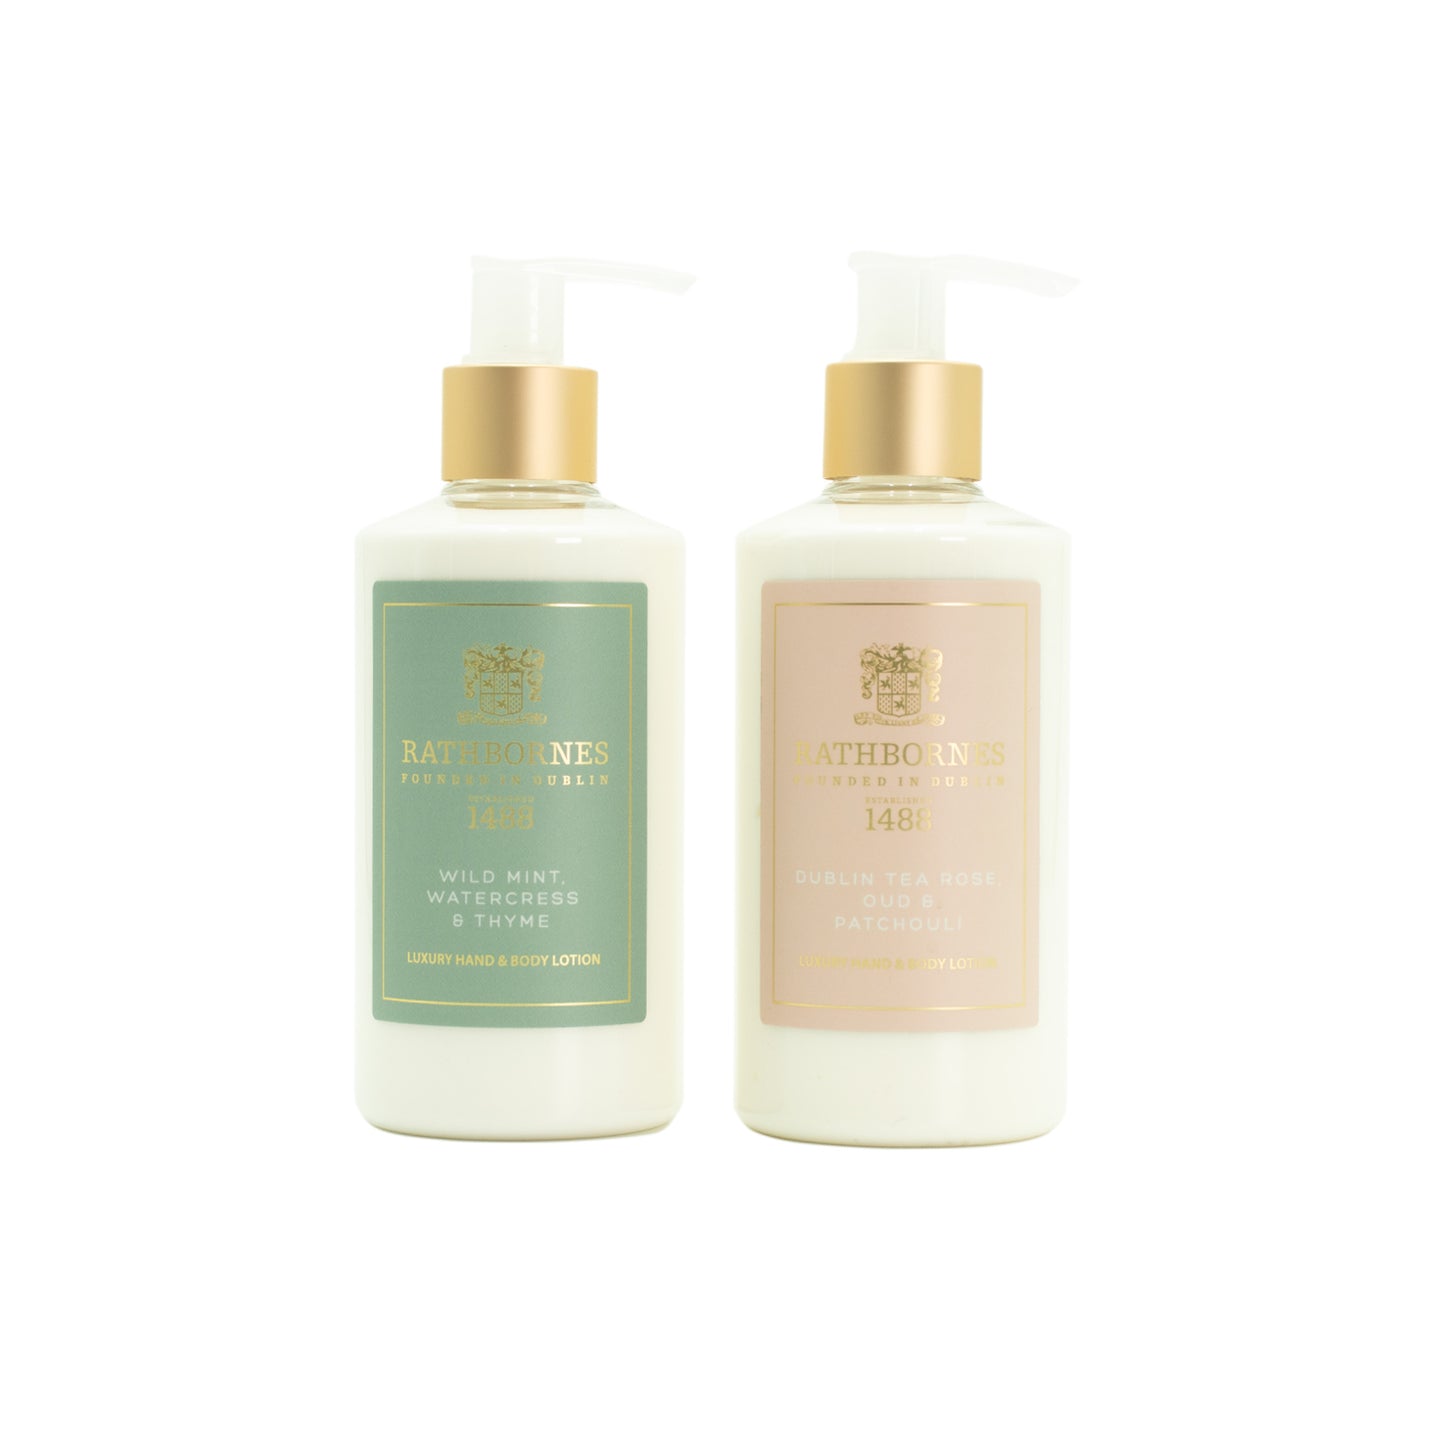 Rathbornes luxuriously rich hand and body lotion